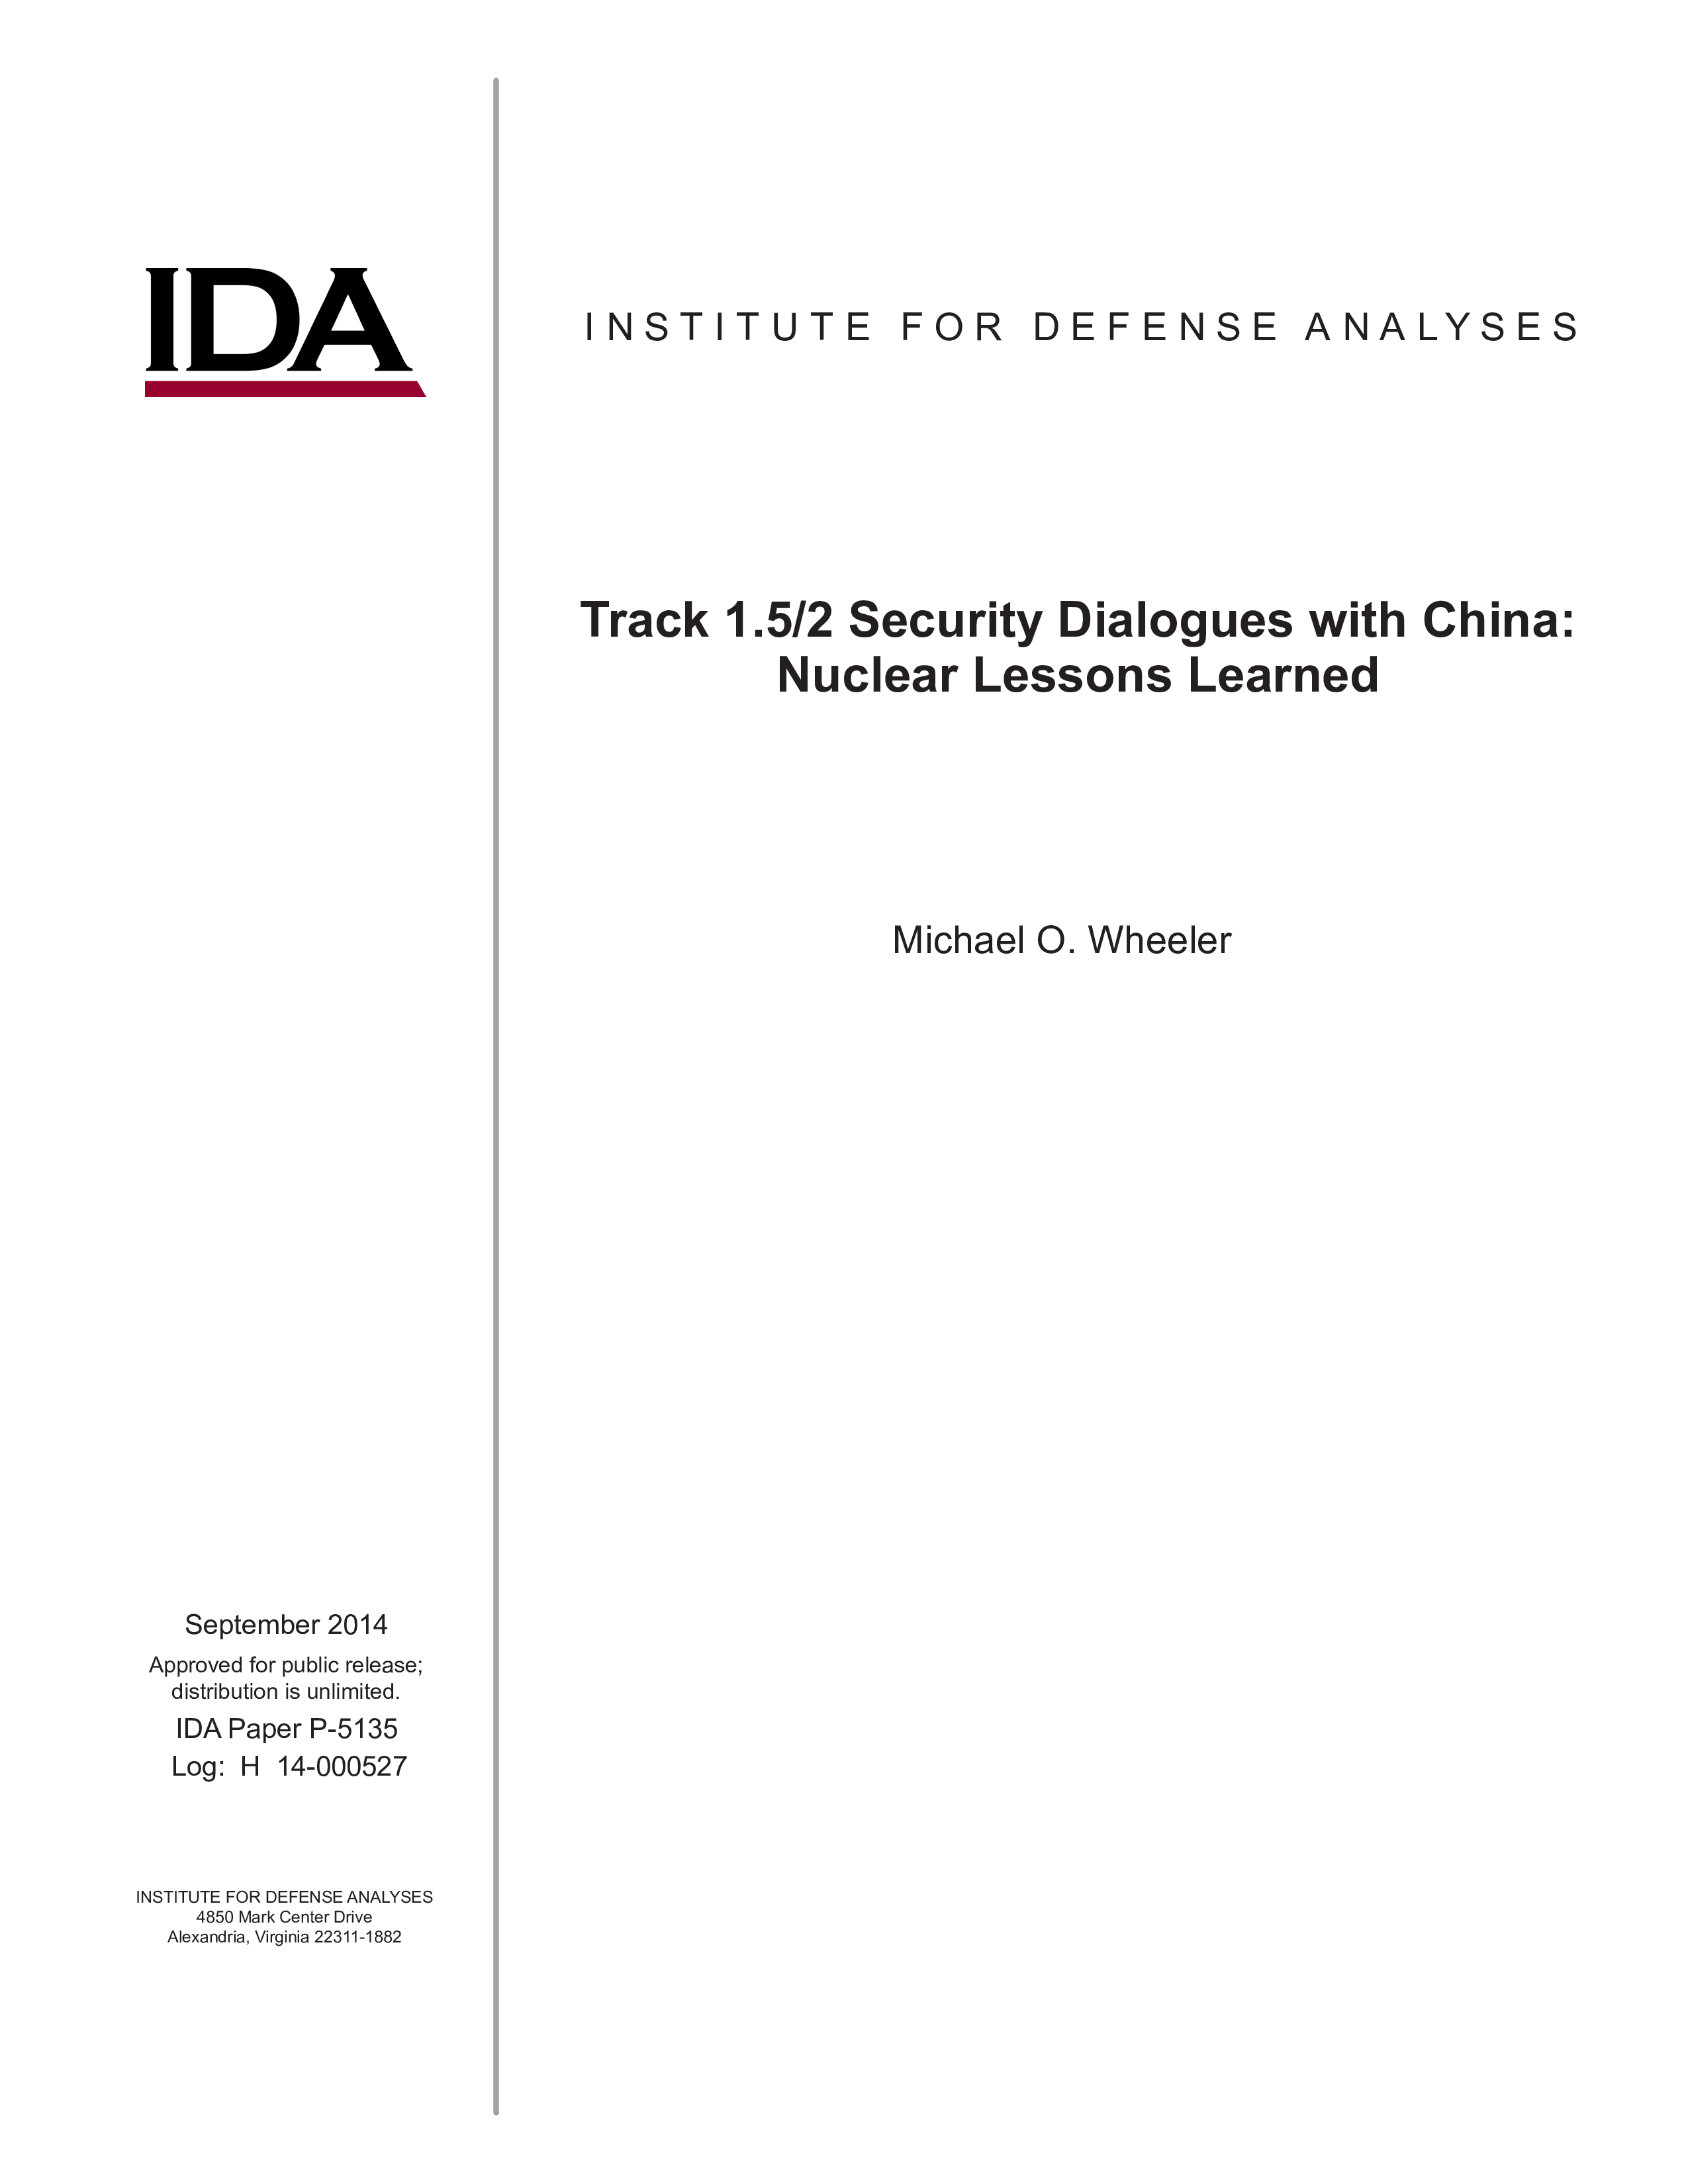 Track 1.5/2 Security Dialogues with China: Nuclear Lessons Learned